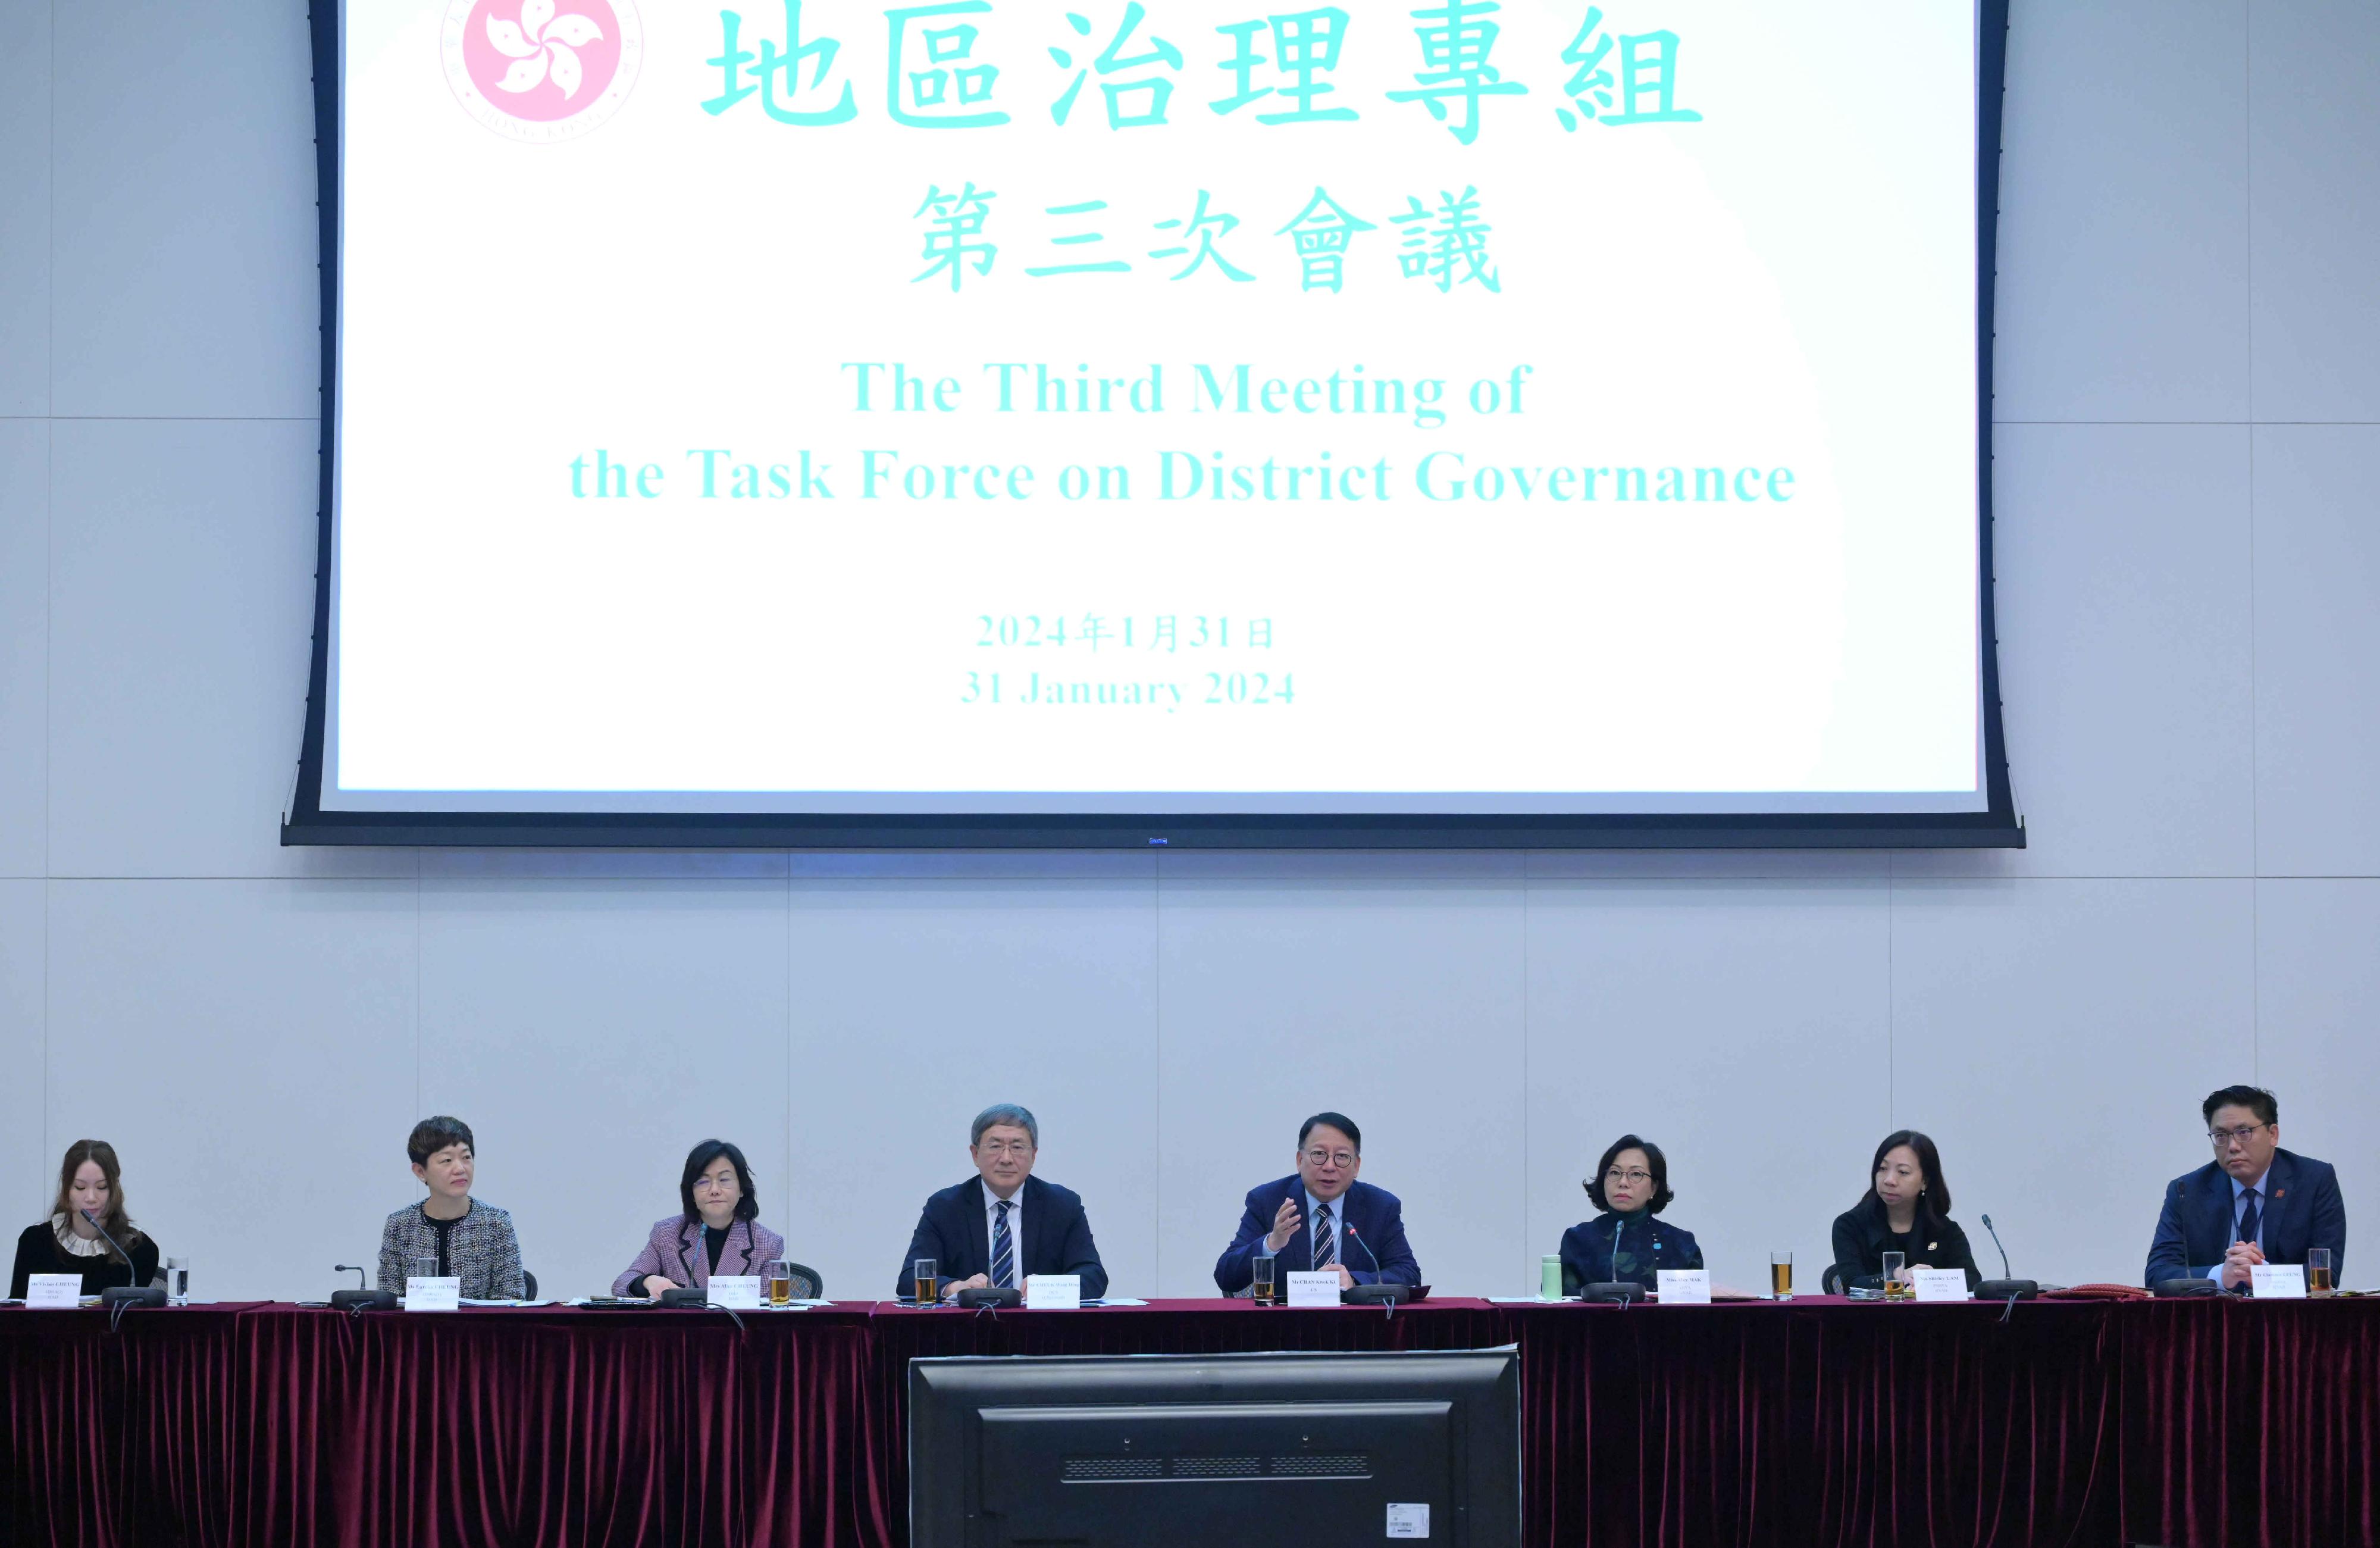 The Chief Secretary for Administration, Mr Chan Kwok-ki (fourth right), today (January 31) attends the third meeting of the Task Force on District Governance chaired by the Deputy Chief Secretary for Administration, Mr Cheuk Wing-hing (fourth left), and instructs bureaux and departments to make good preparations for the celebration of the 75th anniversary of the founding of the People's Republic of China. The Secretary for Home and Youth Affairs, Miss Alice Mak (third right), also attends.